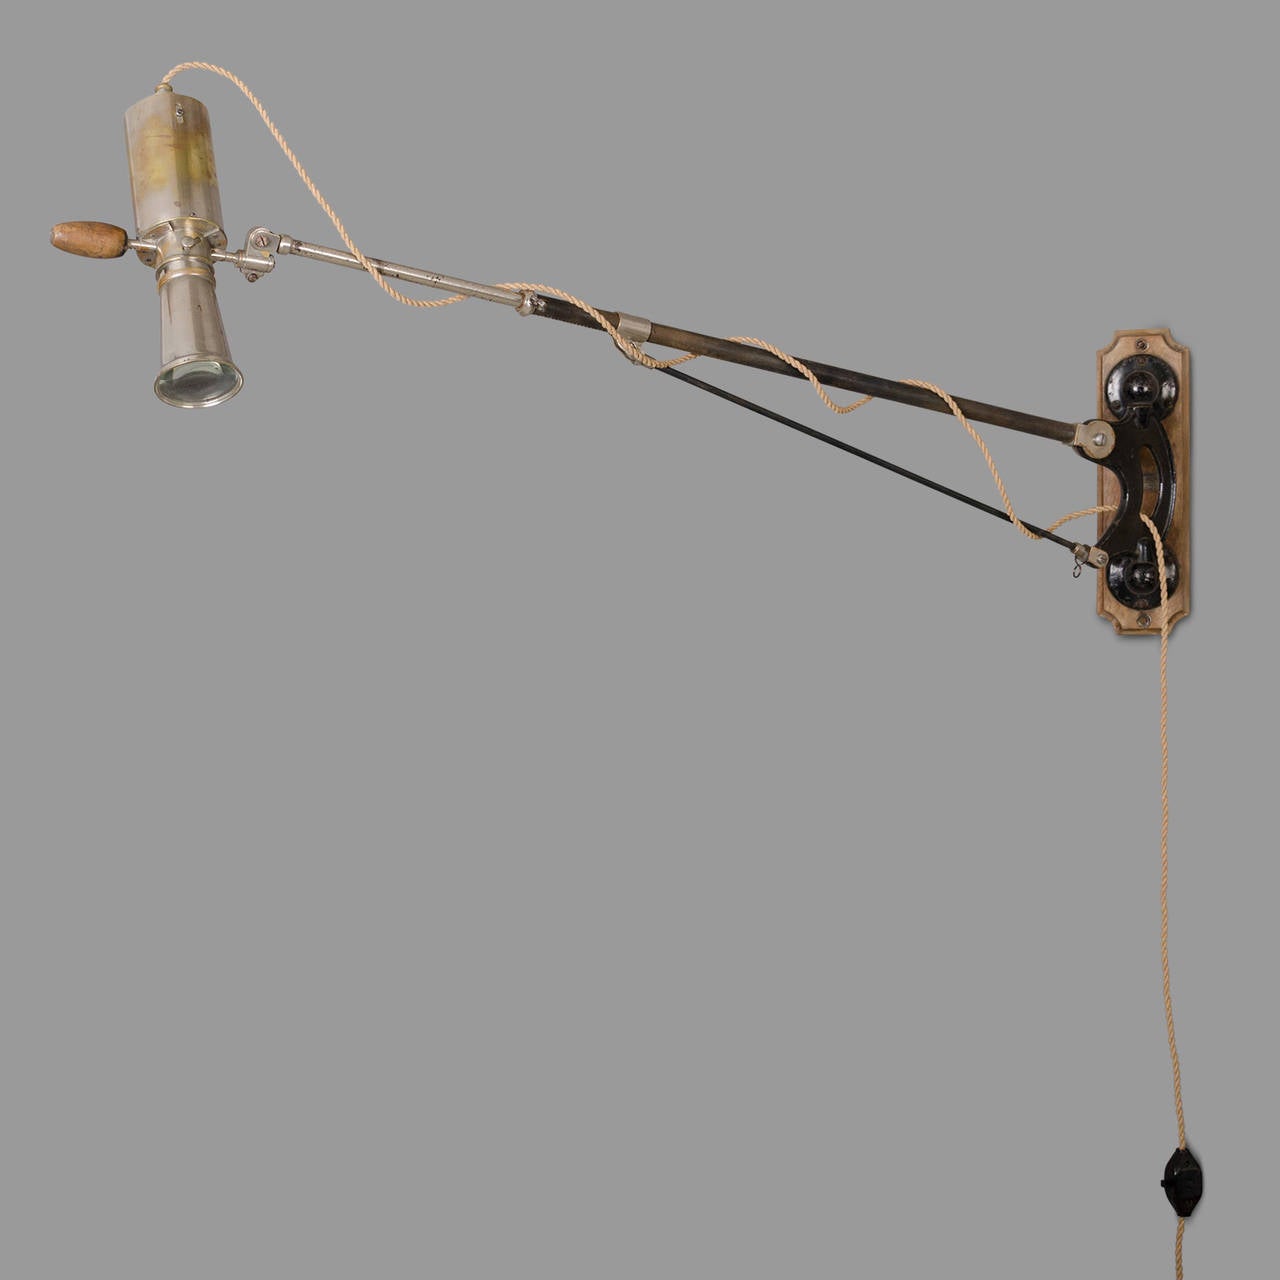 Nickel-plated steel and raw steel wall lamp. Wooden handle for manipulation. This Directional, telescopic and hinged lamp is equipped with a lens which allows the light concentration. Mounted on a wooden deck.

Label of the manufacturer: